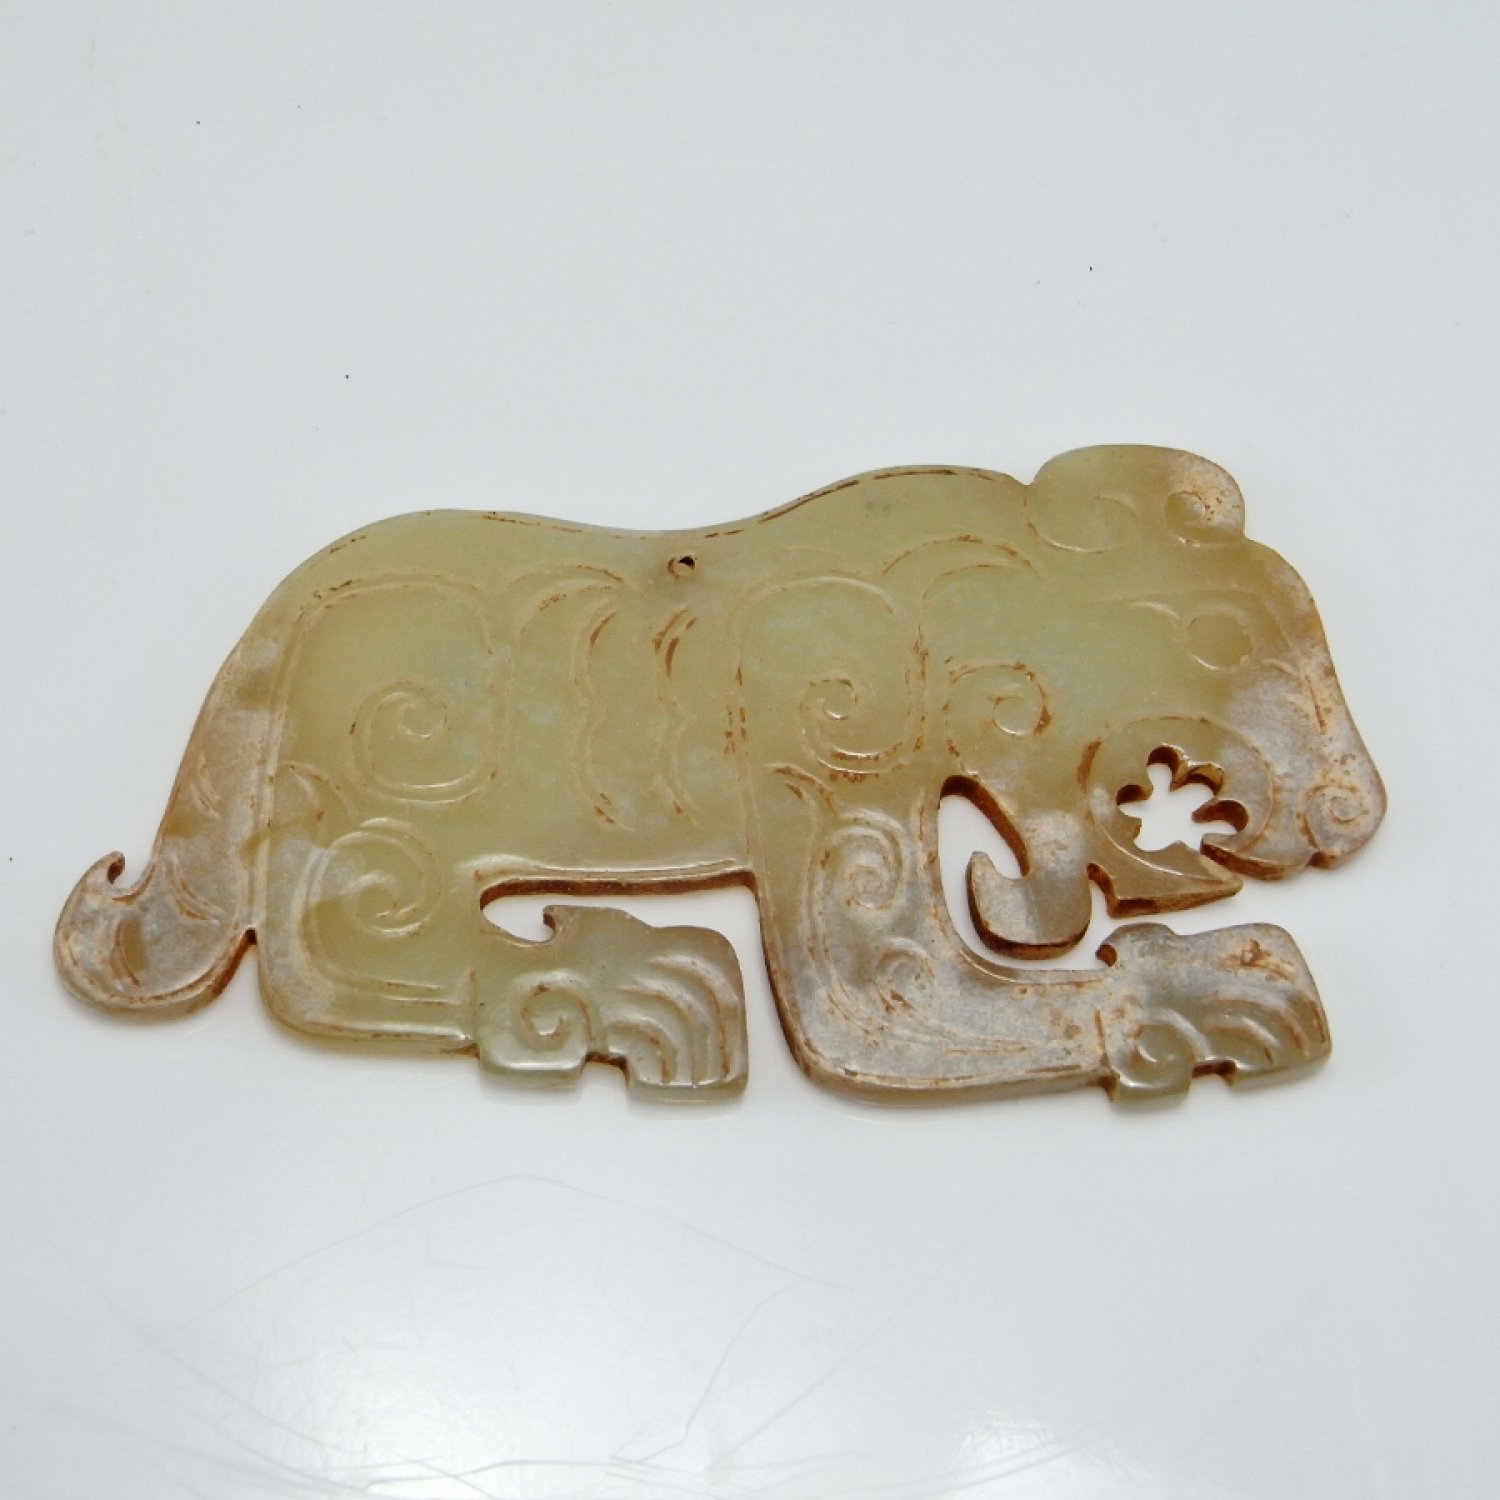 1000BC Western Zhou Dynasty Ancient China Chinese Tiger Amulet Jade Pendant Nephrite Hand Carved Archaic Jade Artifacts Chinese Antiques Talisman Amulet